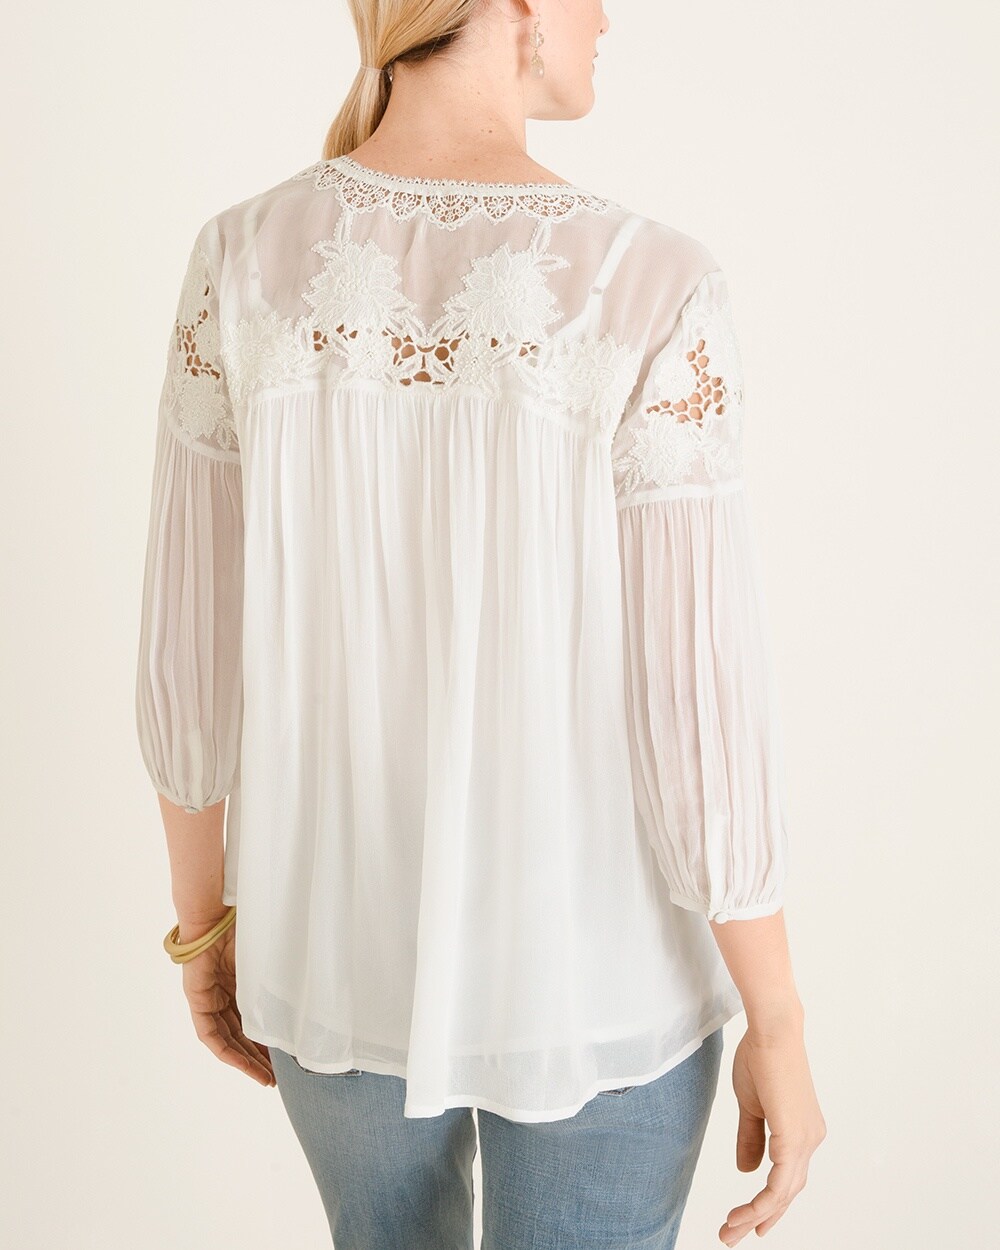 Beaded Peasant Blouse - Chico's